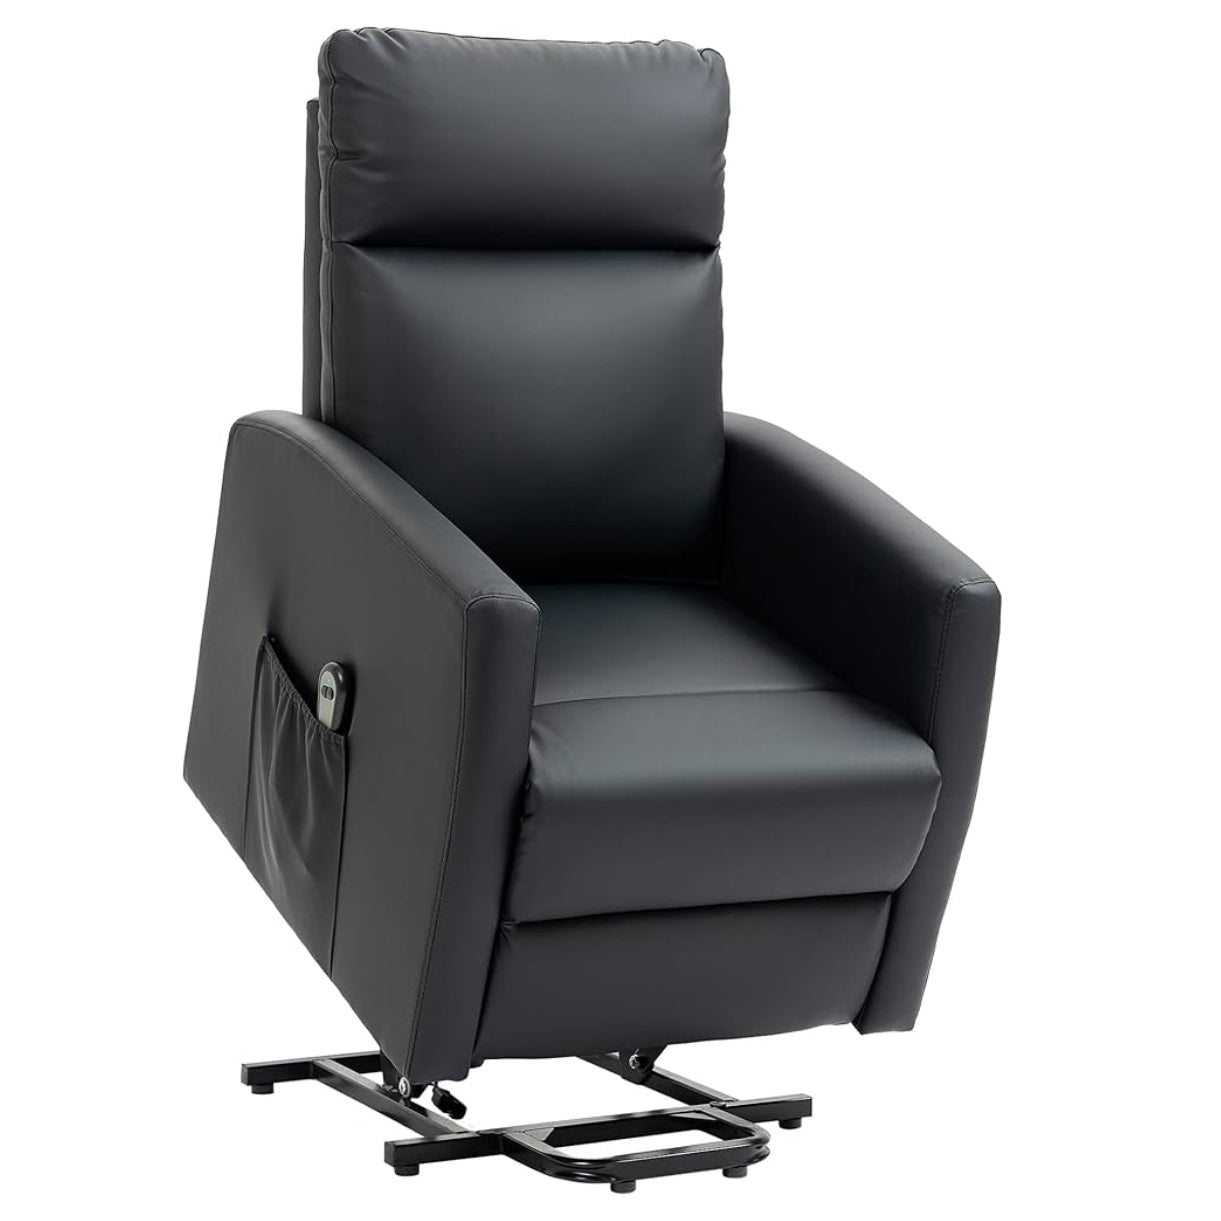 Image of Black Electric Lift Chair Recliners for Seniors